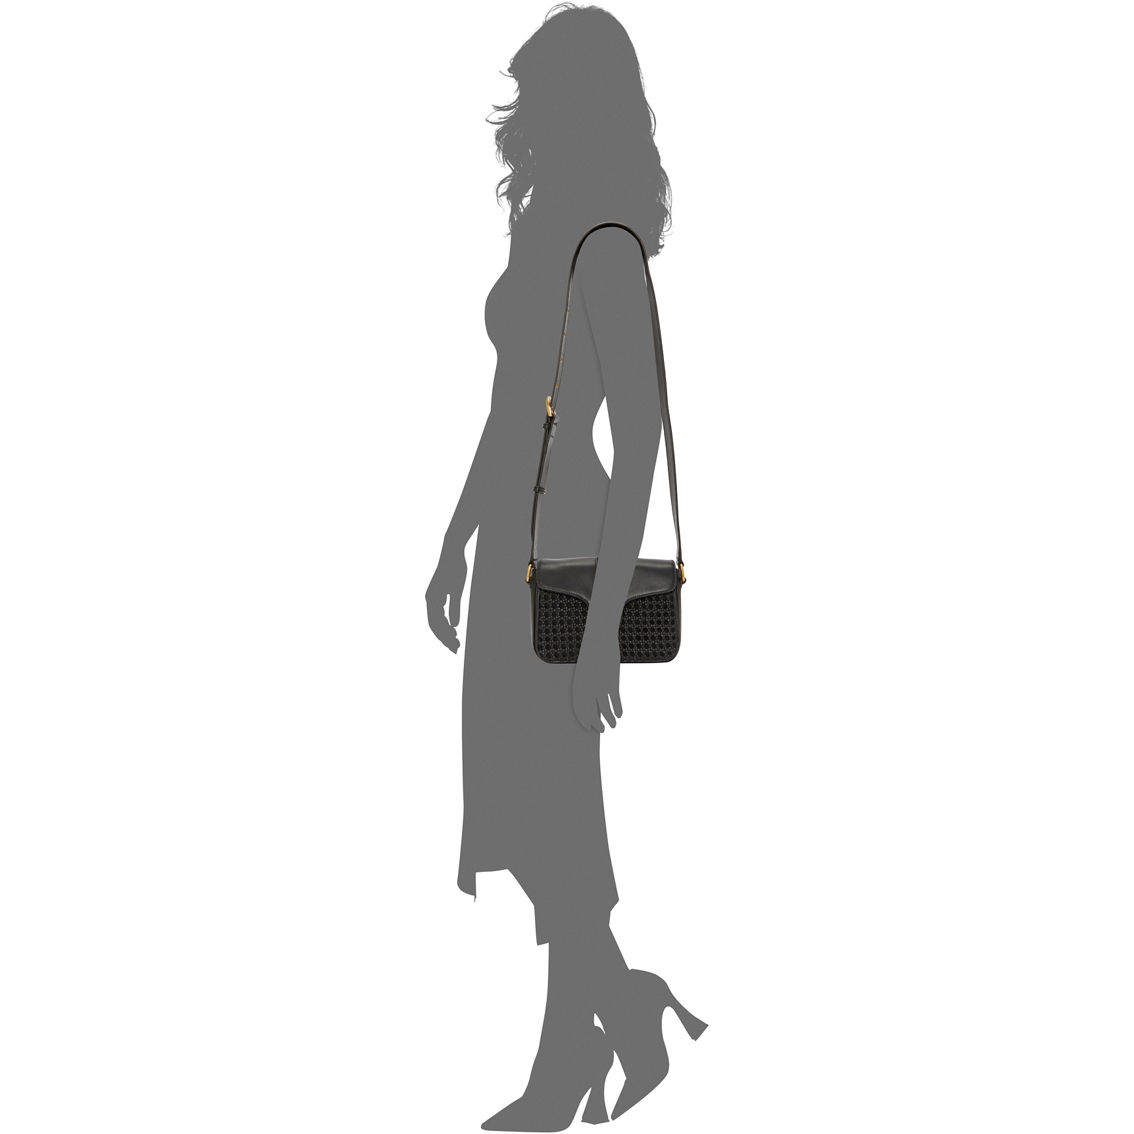 Vince Camuto Maecy Crossbody, Black - Image 4 of 4